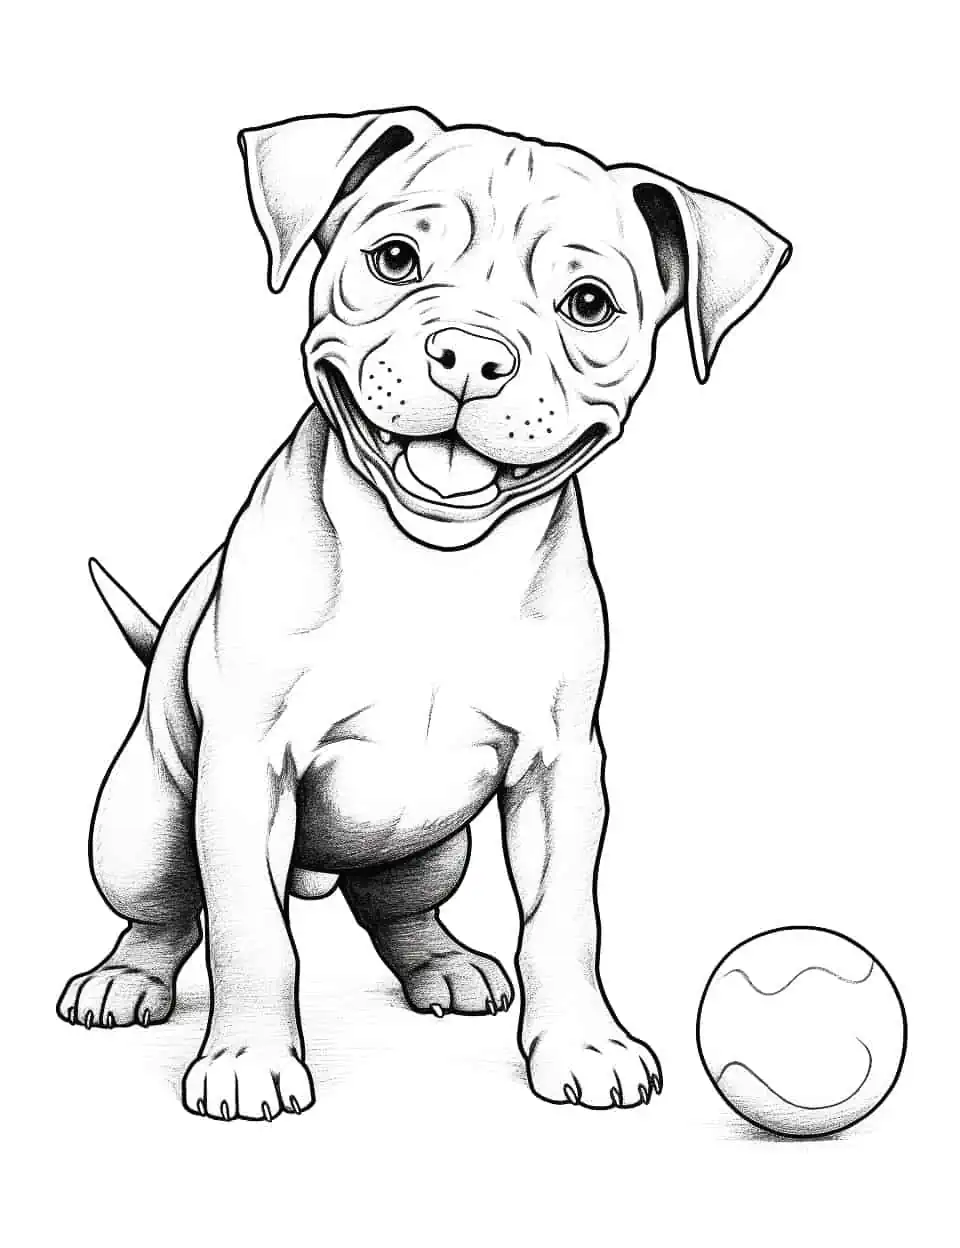 Pitbull Puppy Playing Dog Coloring Page - An adorable Pitbull puppy playing with a colorful ball.